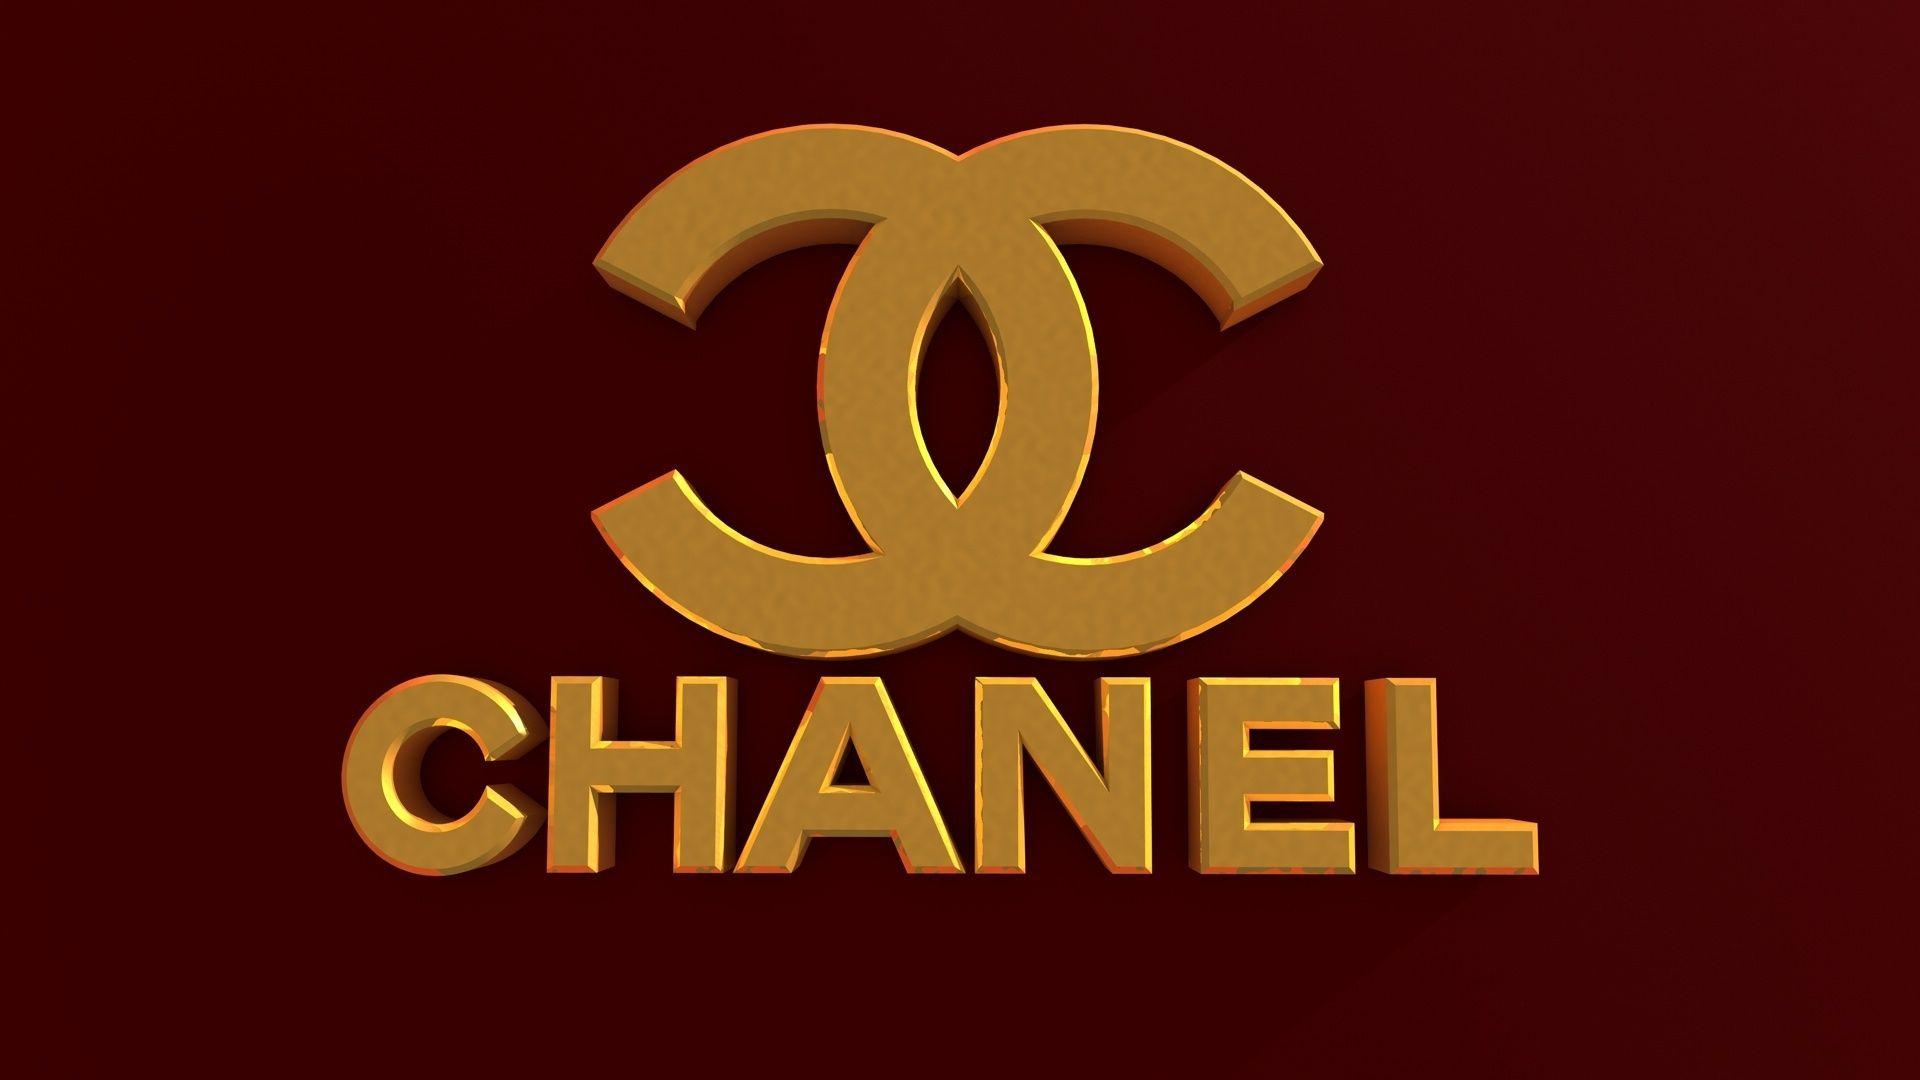 Coco Chanel Gold Logo - Pin by Kimberly on CHANEL LOGO in 2019 | Pinterest | Chanel ...